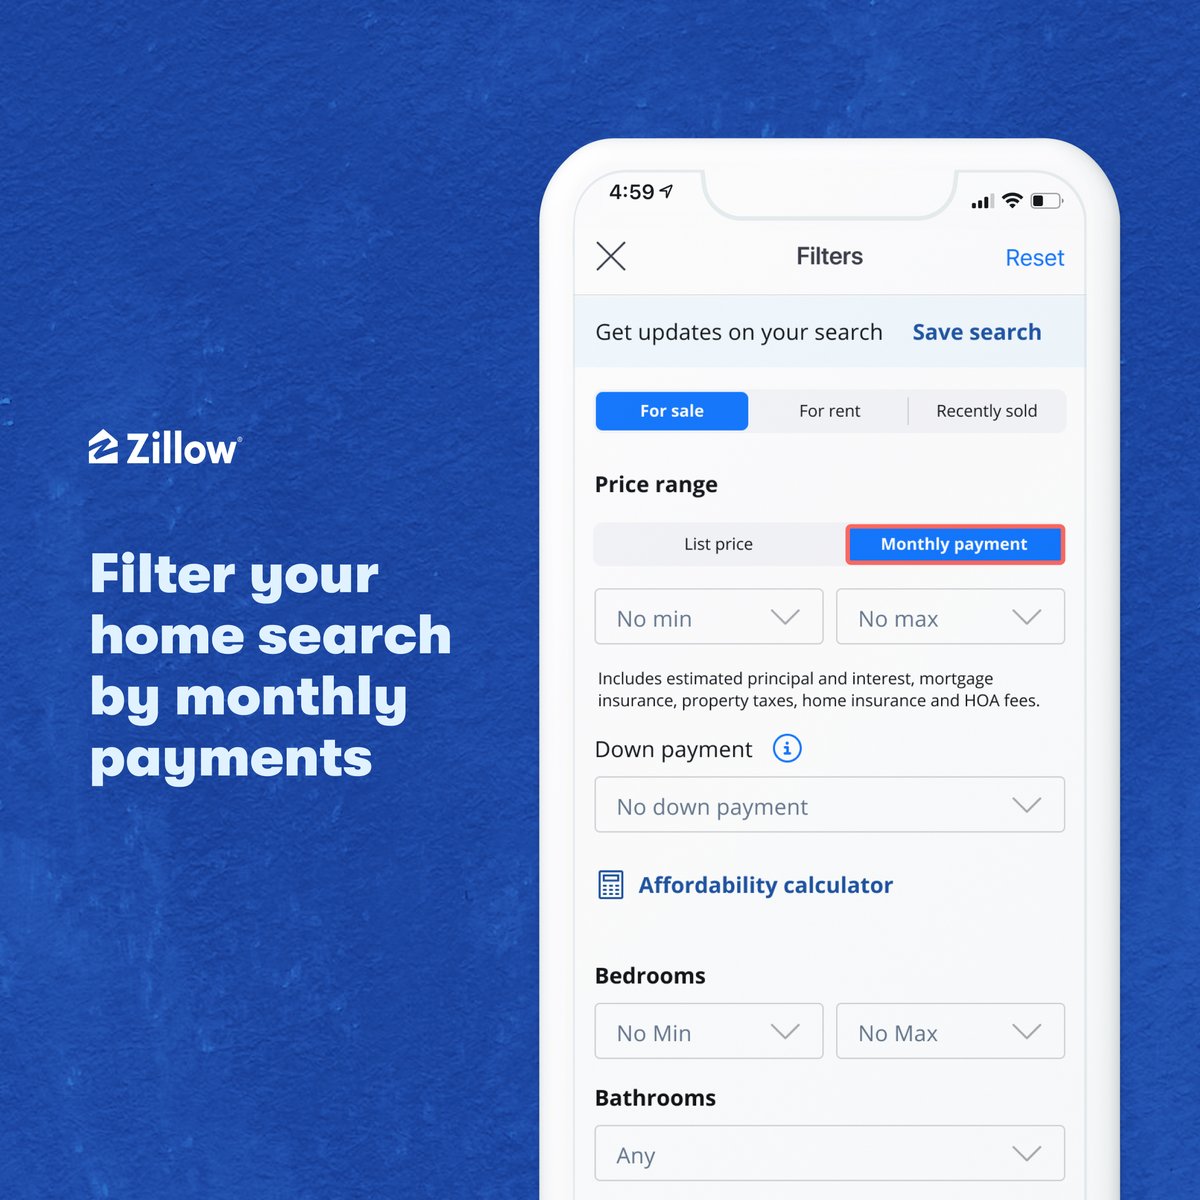 It's official: you can now filter your home search by monthly payments. We take everything into account (like your down payment amount, insurance, and taxes) and show you homes that fit your actual budget. 

Log into your account → hit the price filter → search smarter